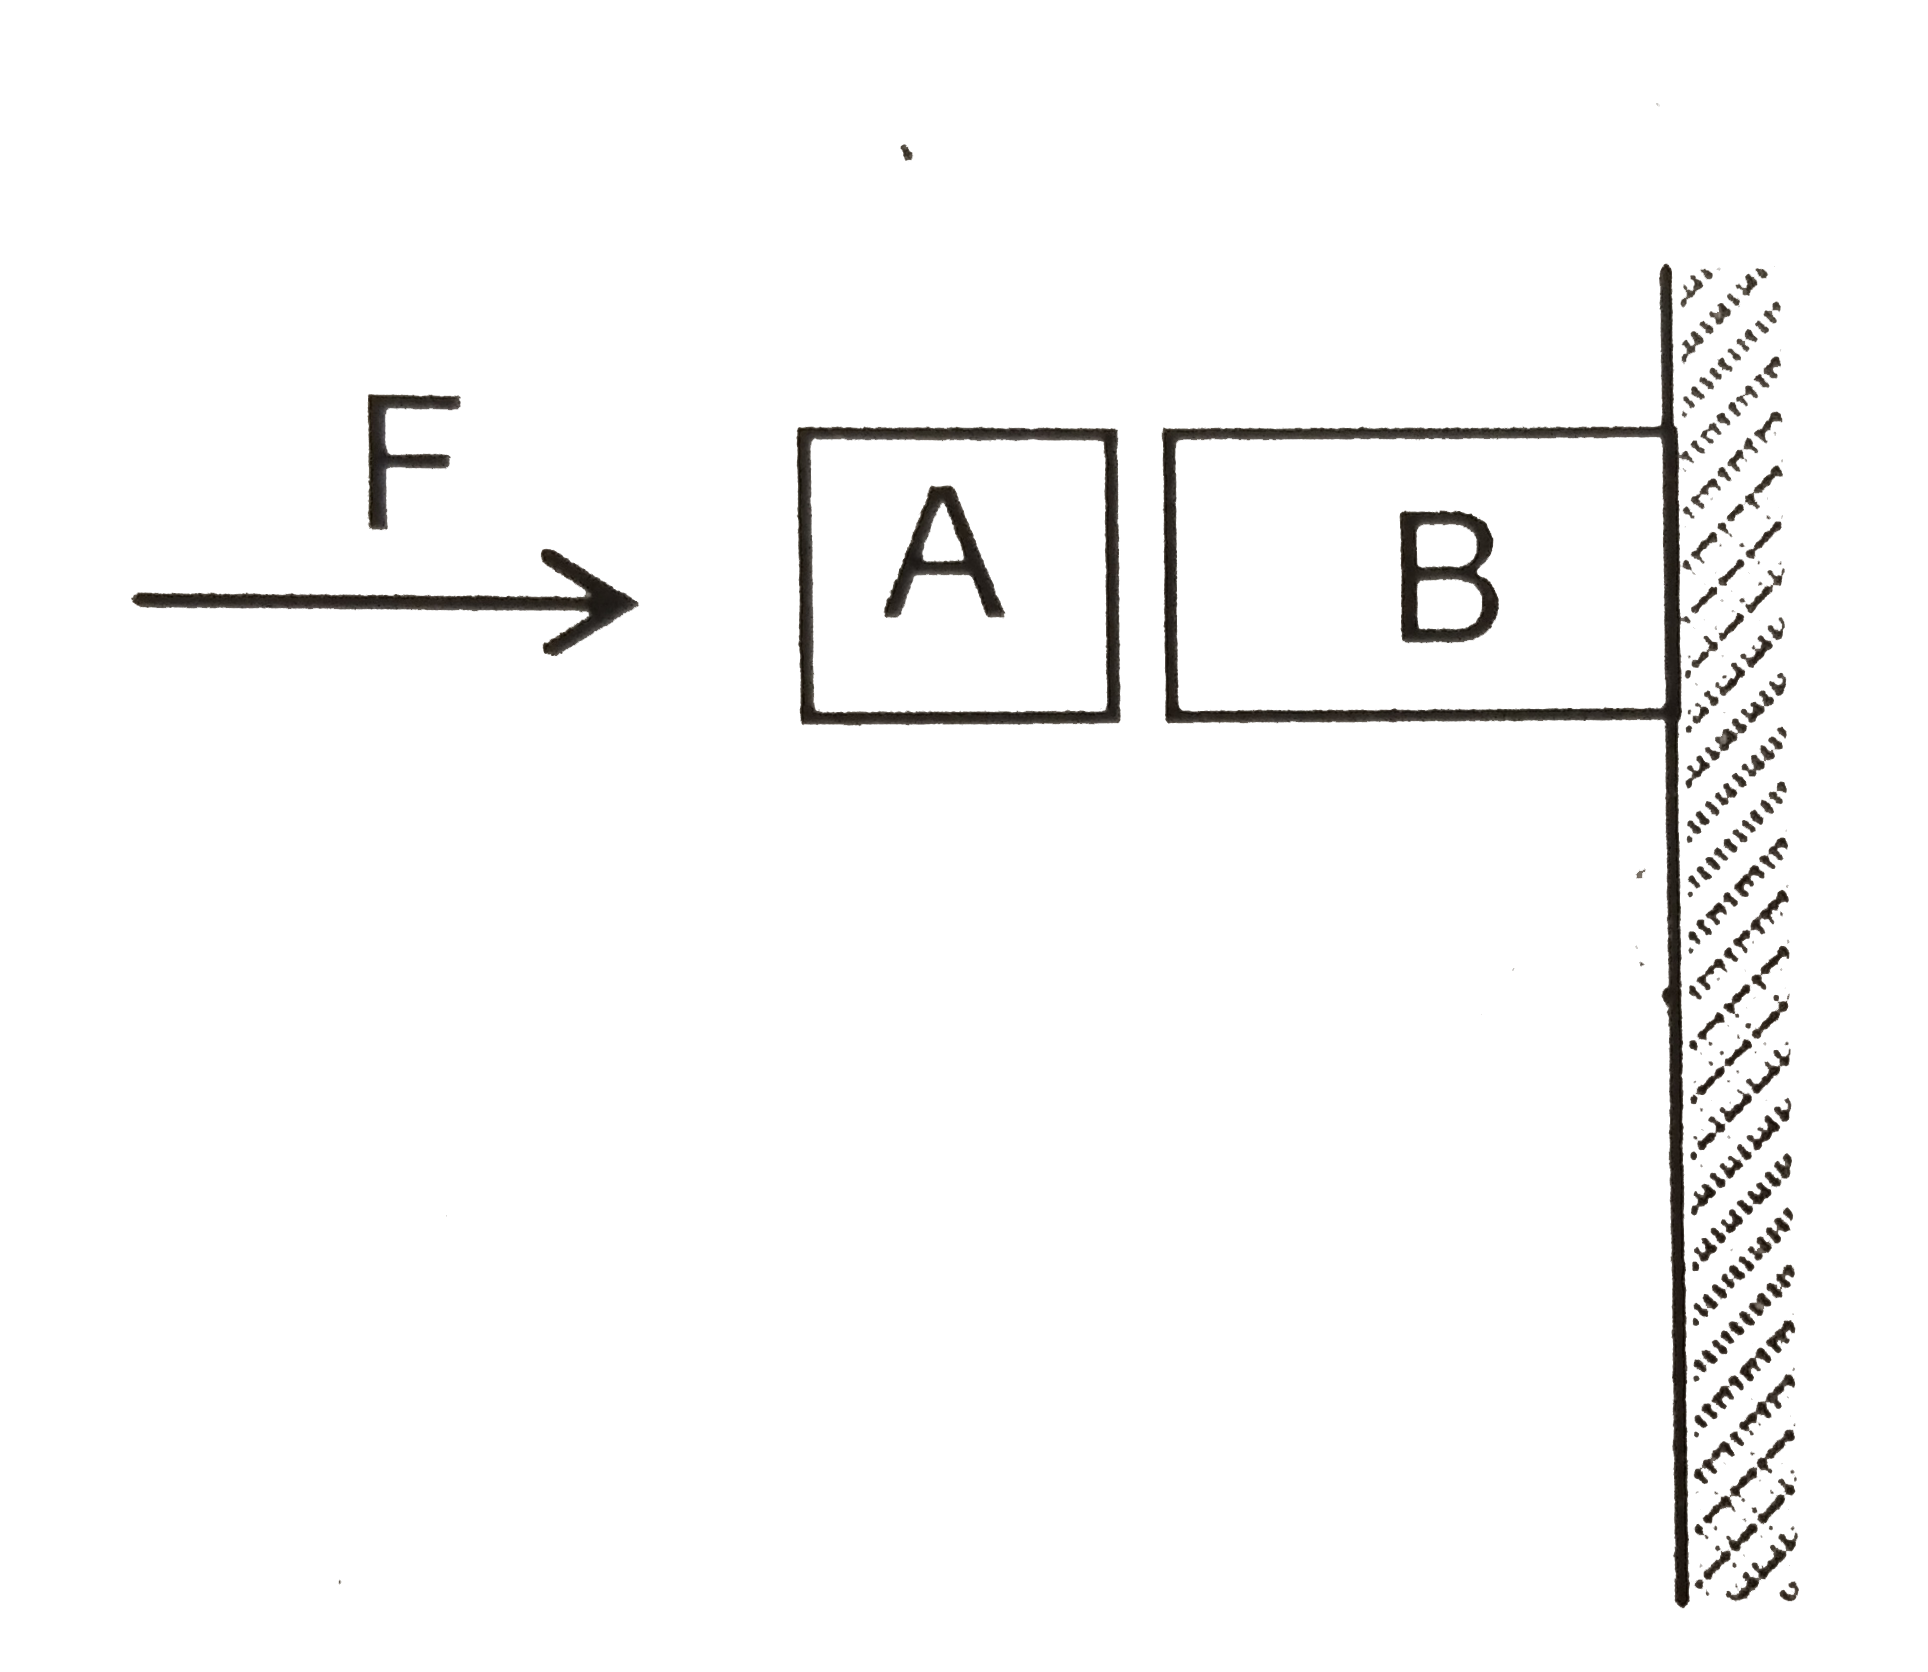 Given in the figure are two blocks A and B of weight 20 N and 100 N respectively. These are being pressed against a wall by a force F as shown. If the coefficient of friction between the blocks is 0.1 and between block B and the wall is 0.15, the frictional force applied by the wall on block B is